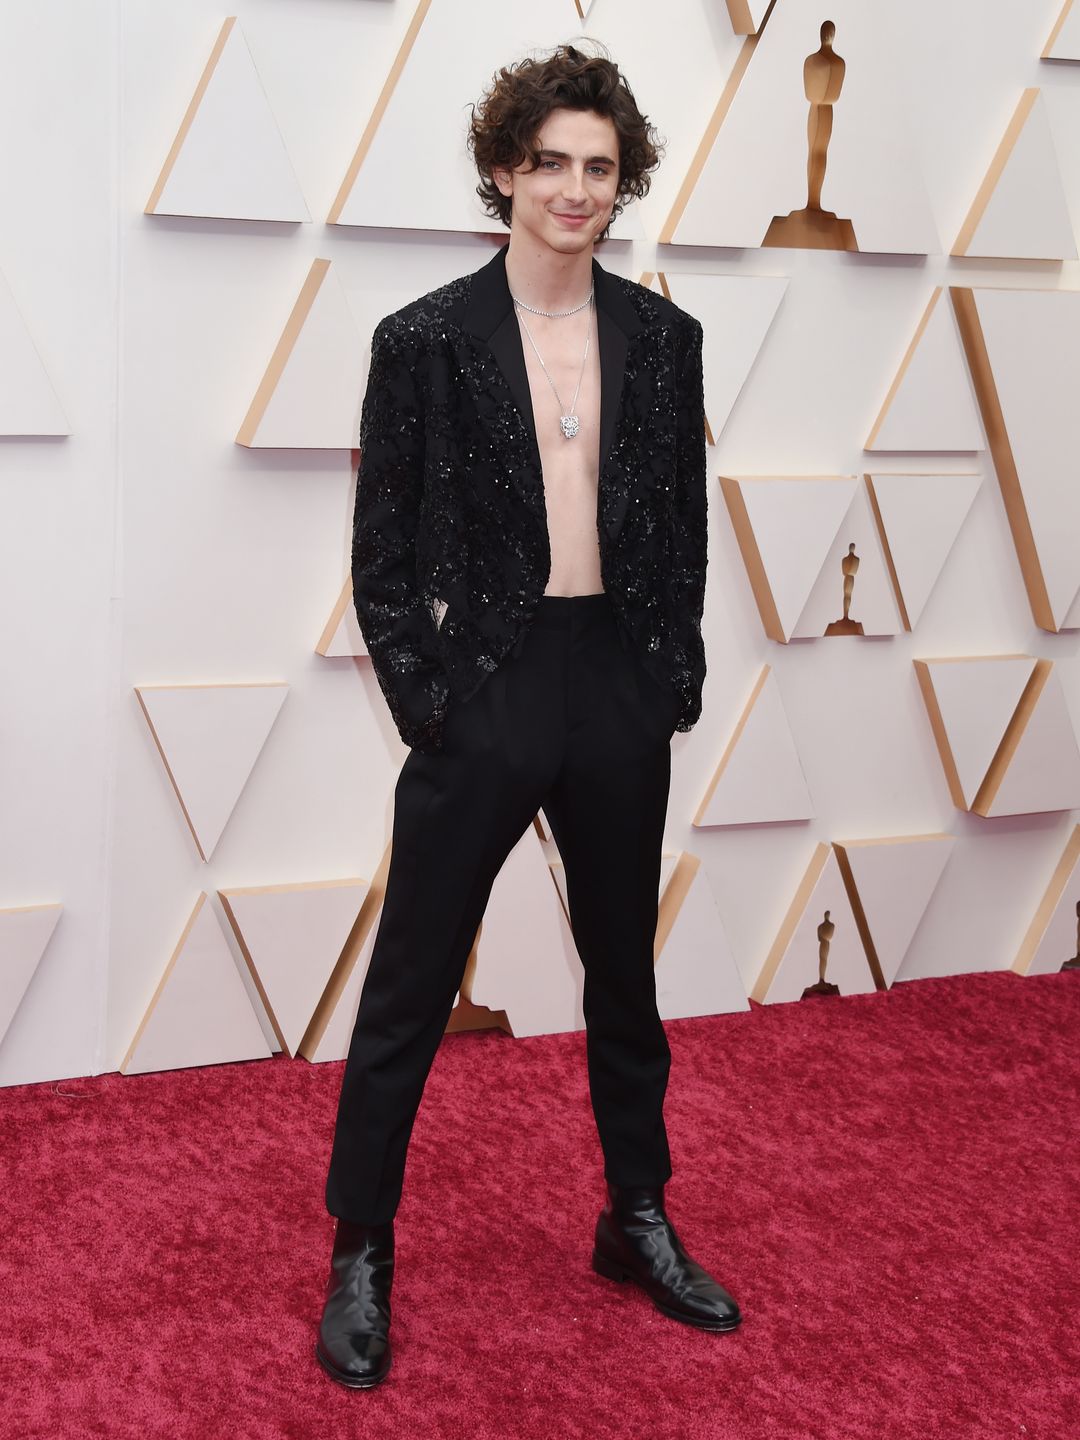 Timothee Chalamet at the 94th Academy Awards held at Dolby Theatre at the Hollywood & Highland Center on March 27th, 2022 in Los Angeles, California